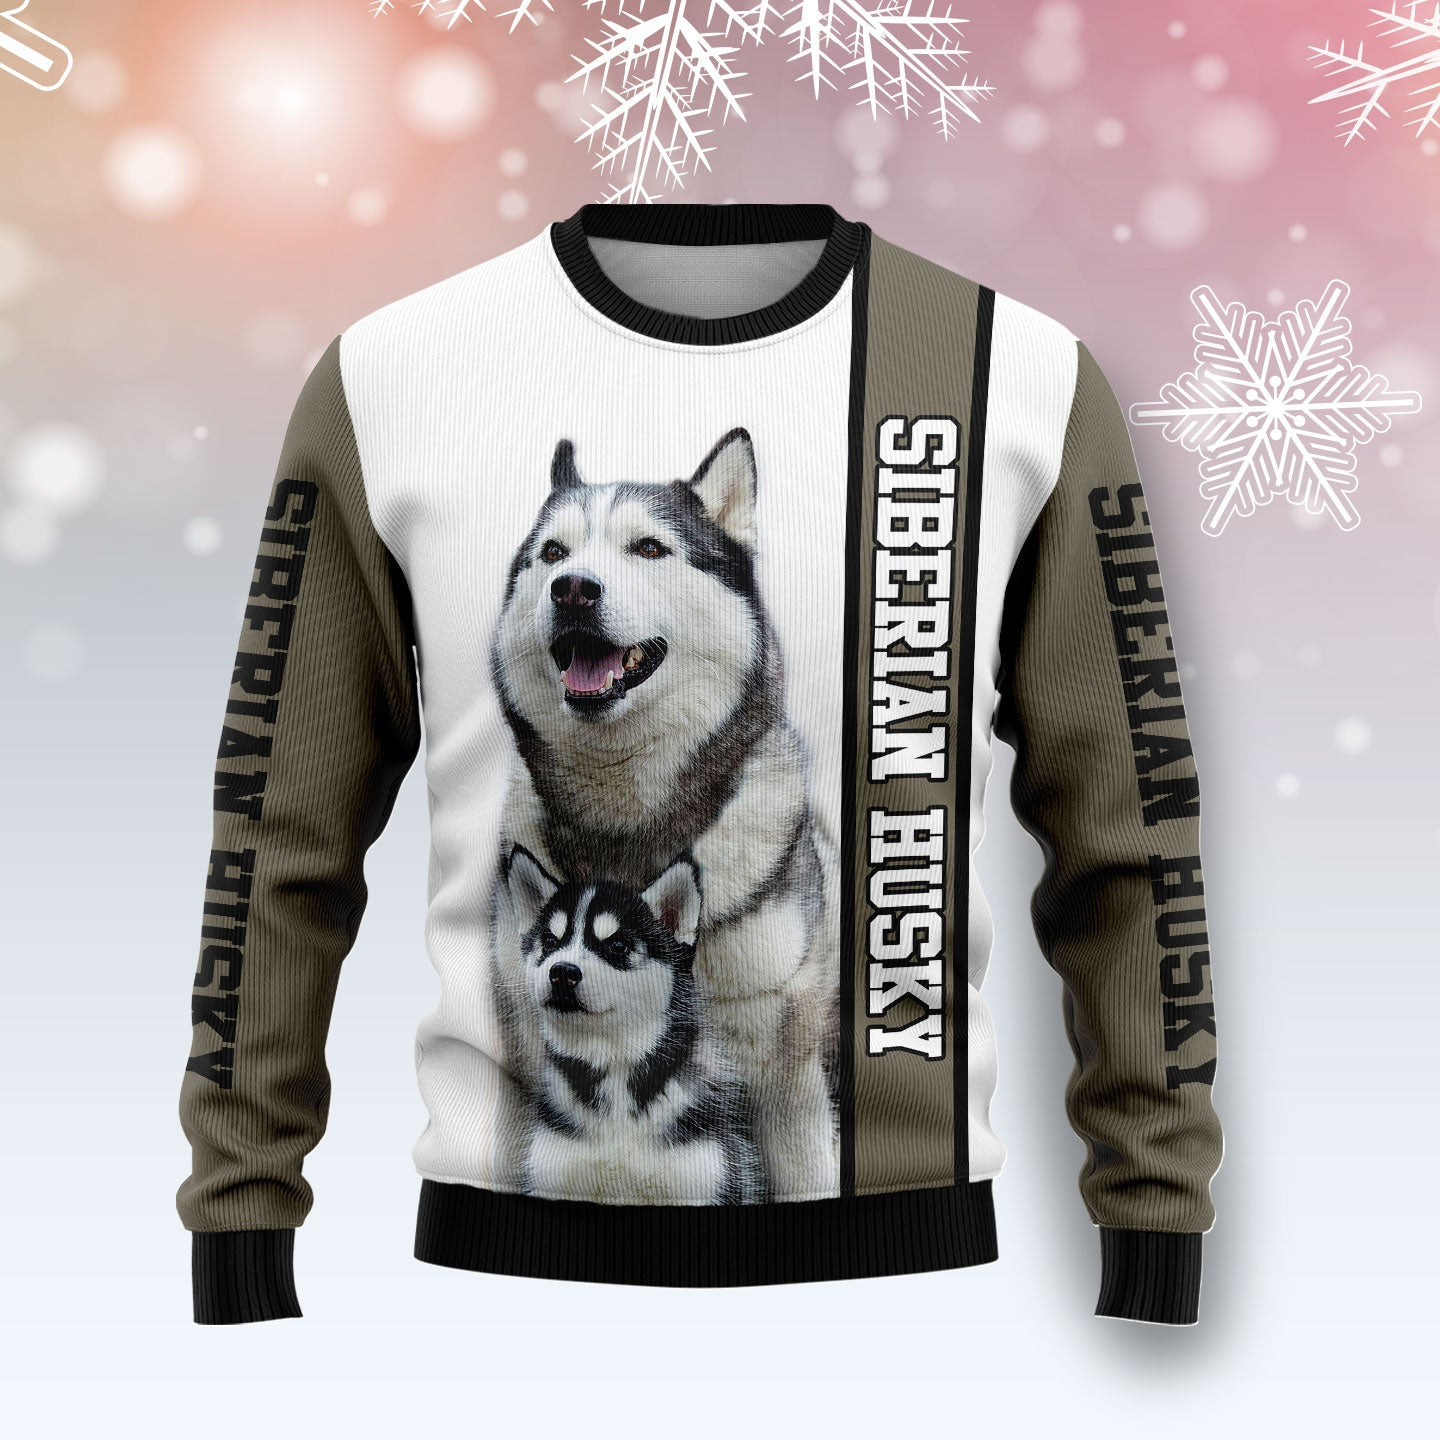 Rescued Siberian Husky Ugly Christmas Sweater, Ugly Sweater For Men Women, Holiday Sweater